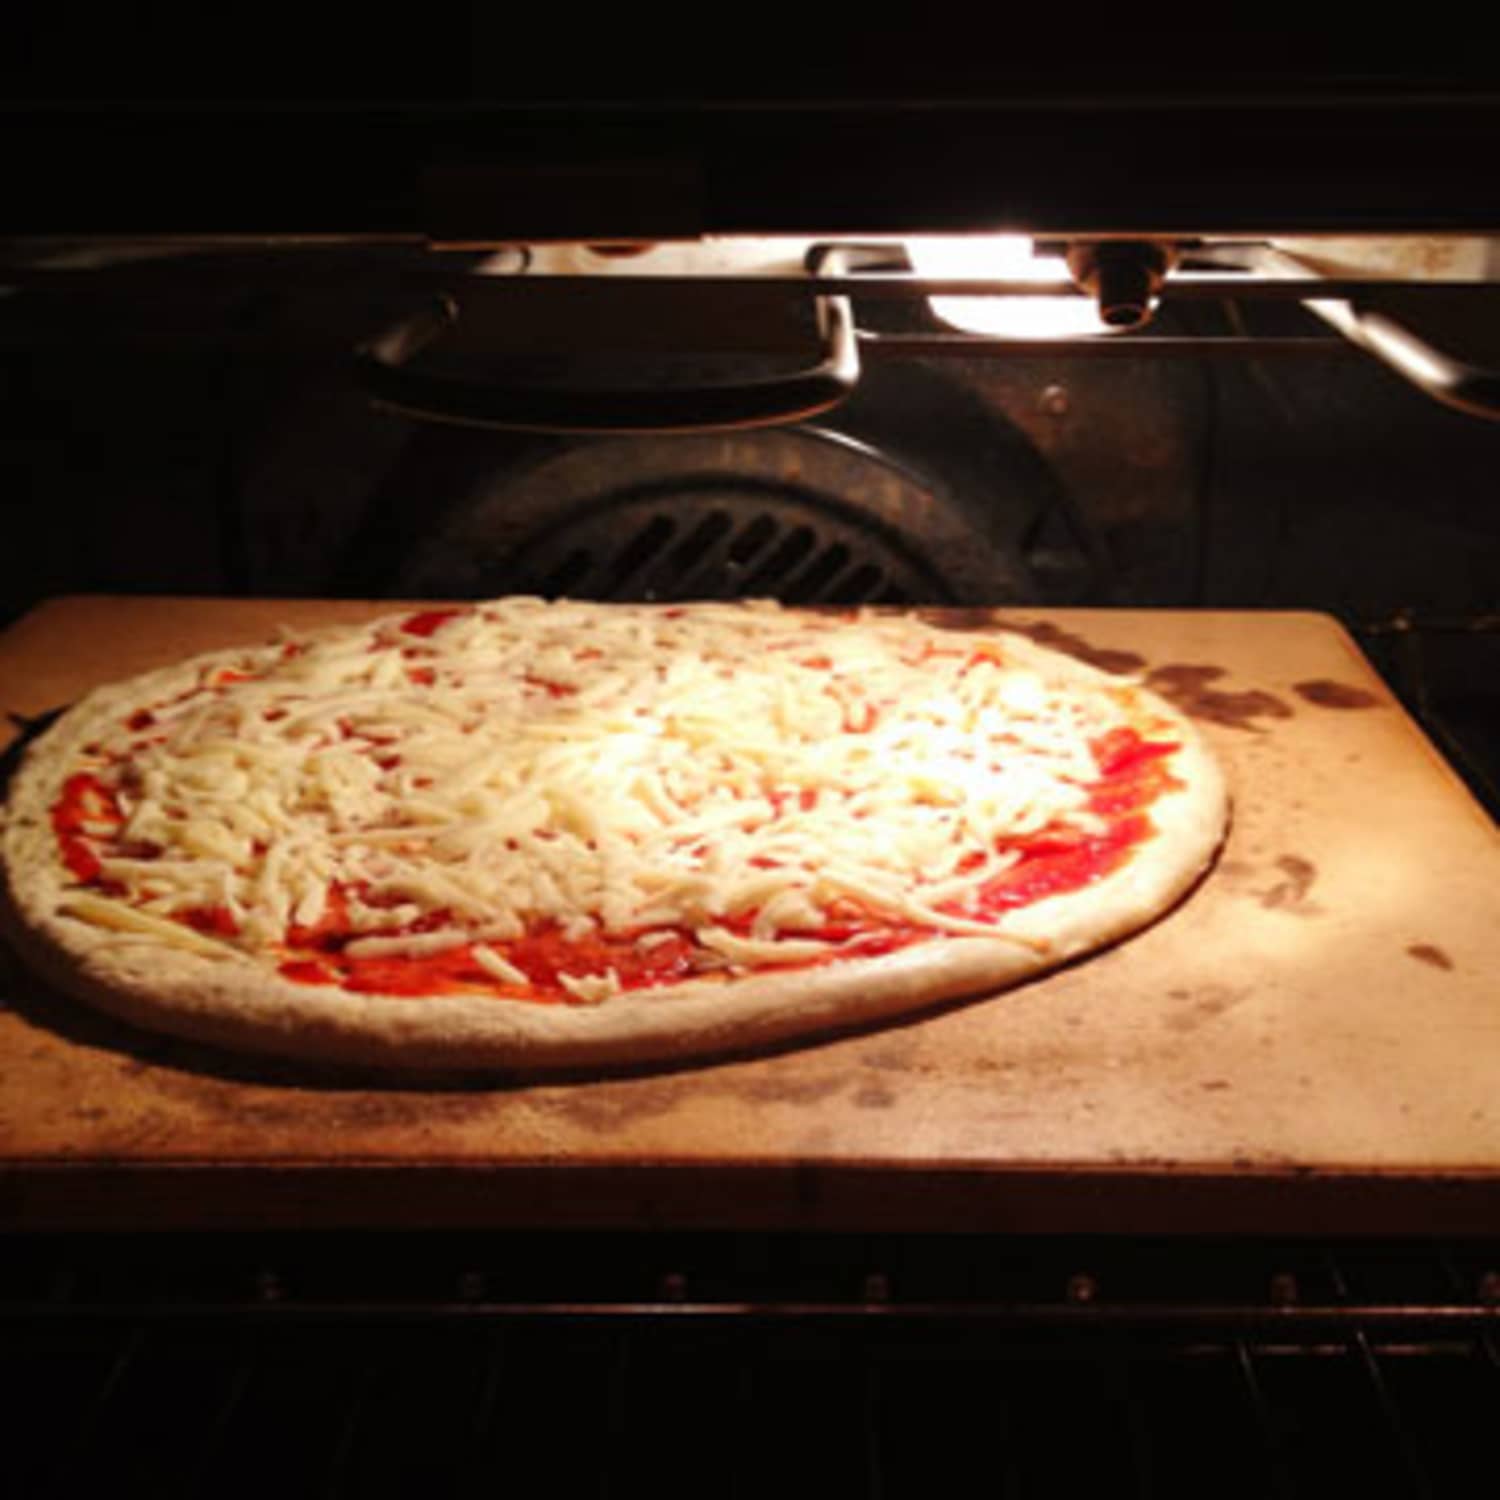 How To Cook Pizza In Oven - Wastereality13